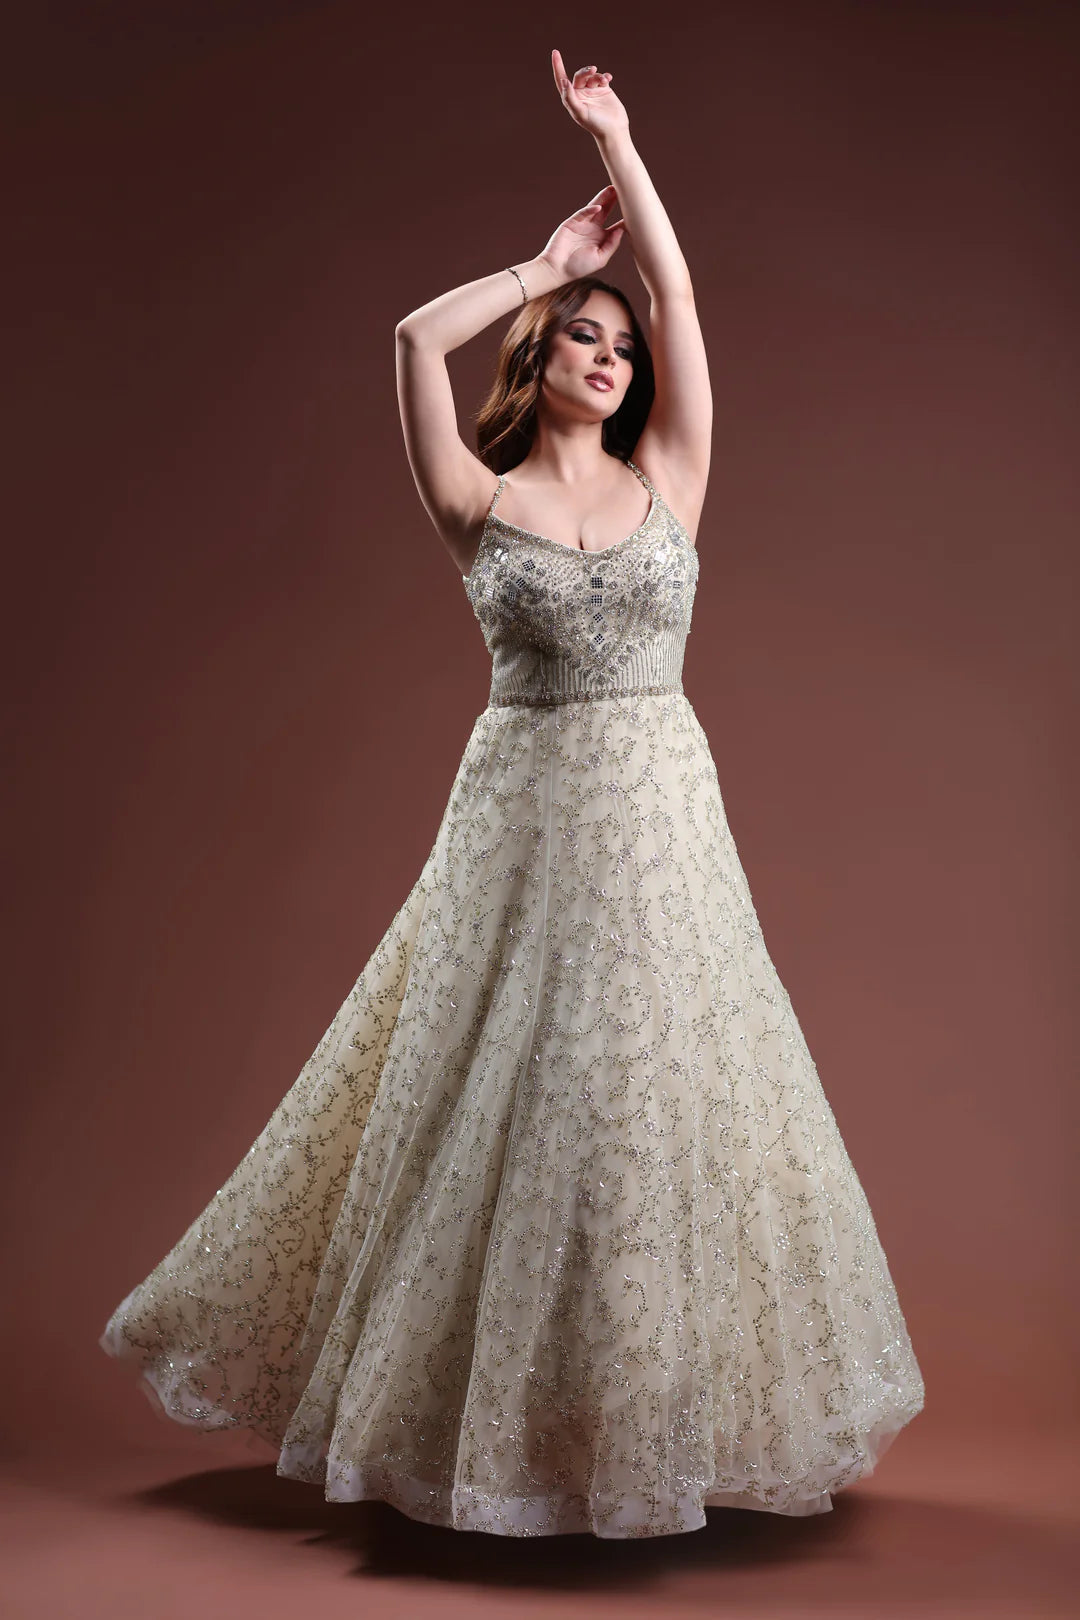 Image of a sparkly white lehenga gown.